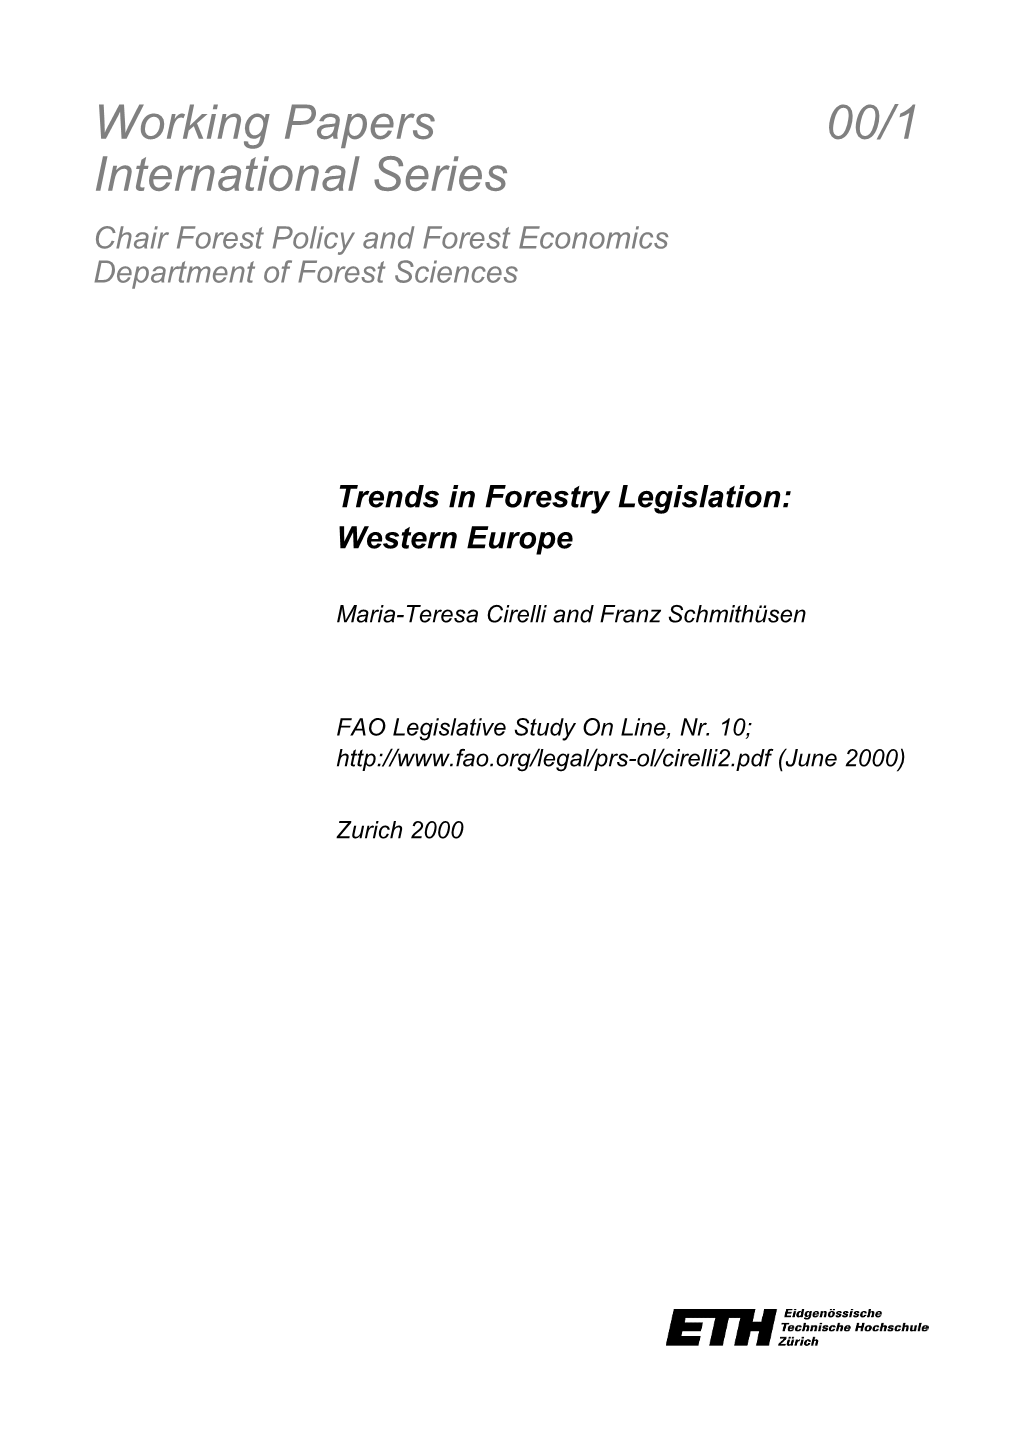 Working Papers 00/1 International Series Chair Forest Policy and Forest Economics Department of Forest Sciences